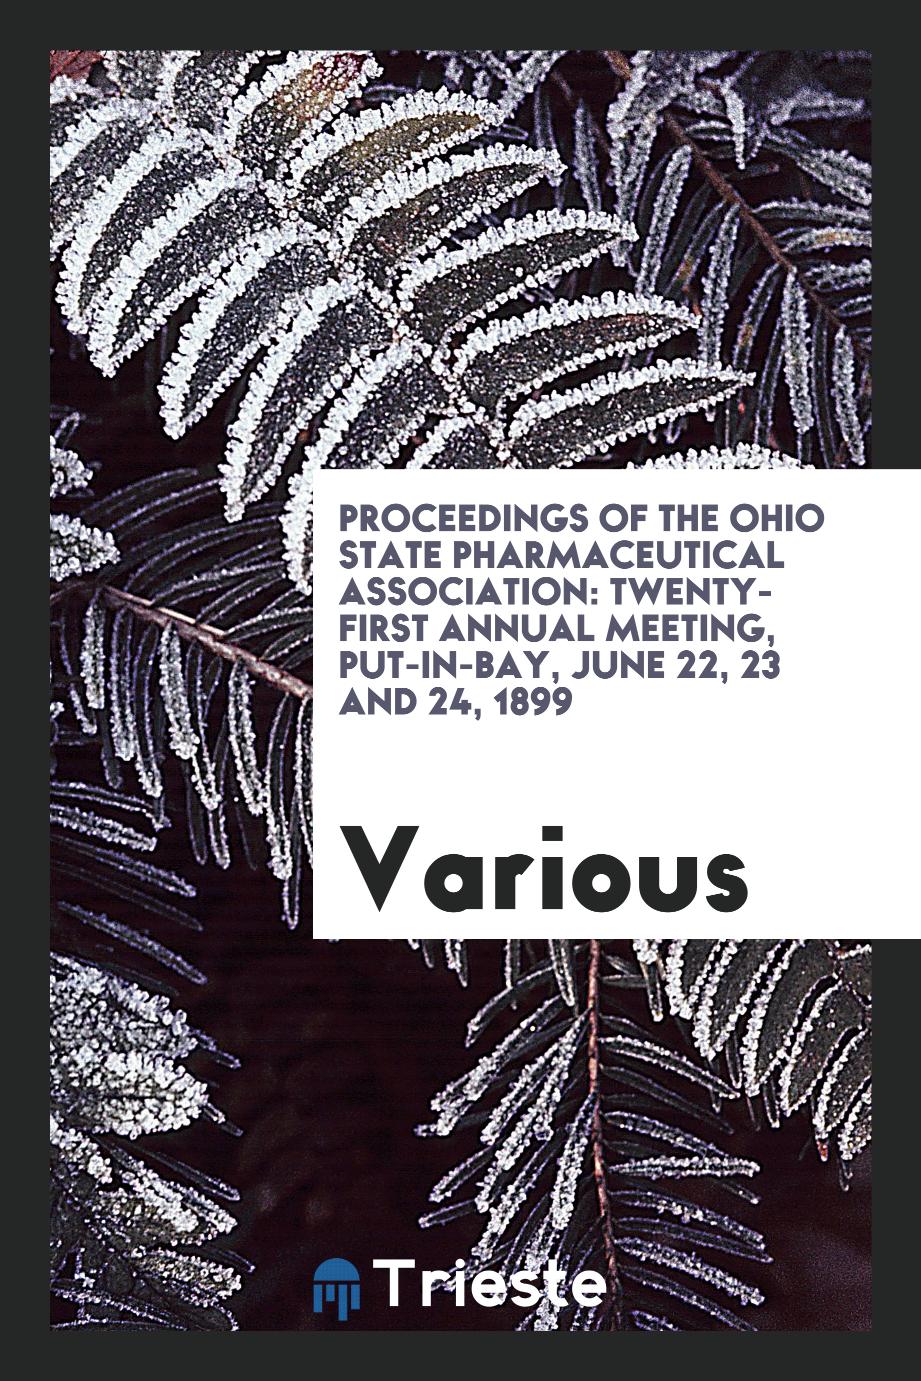 Proceedings of the Ohio State Pharmaceutical Association: Twenty-First Annual Meeting, Put-in-Bay, June 22, 23 and 24, 1899